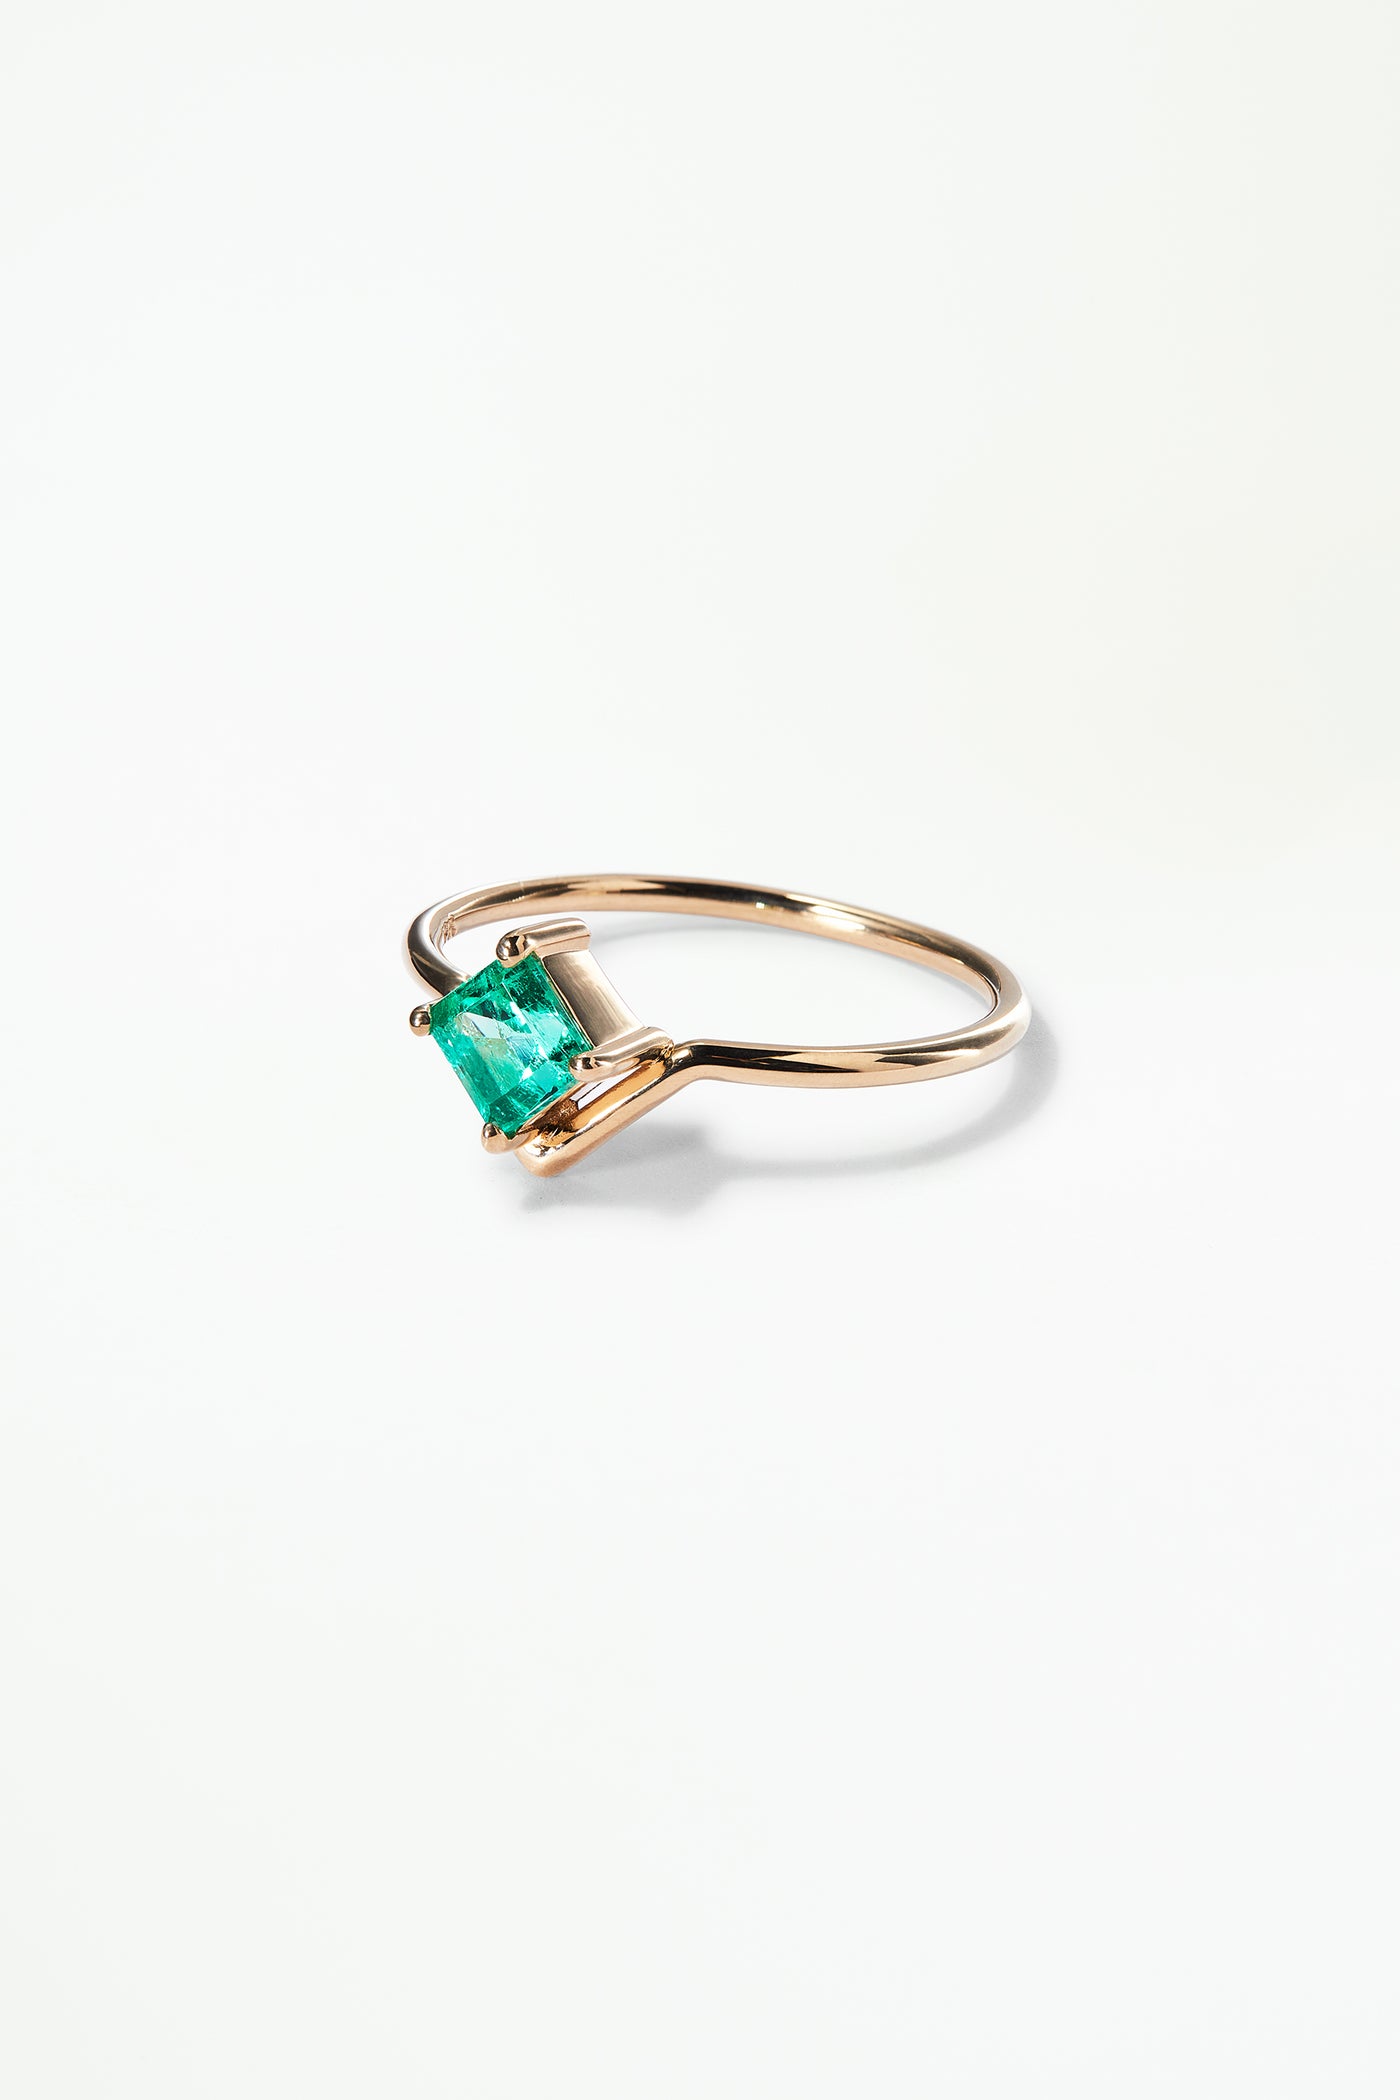 One of a Kind Nestled Emerald Ring